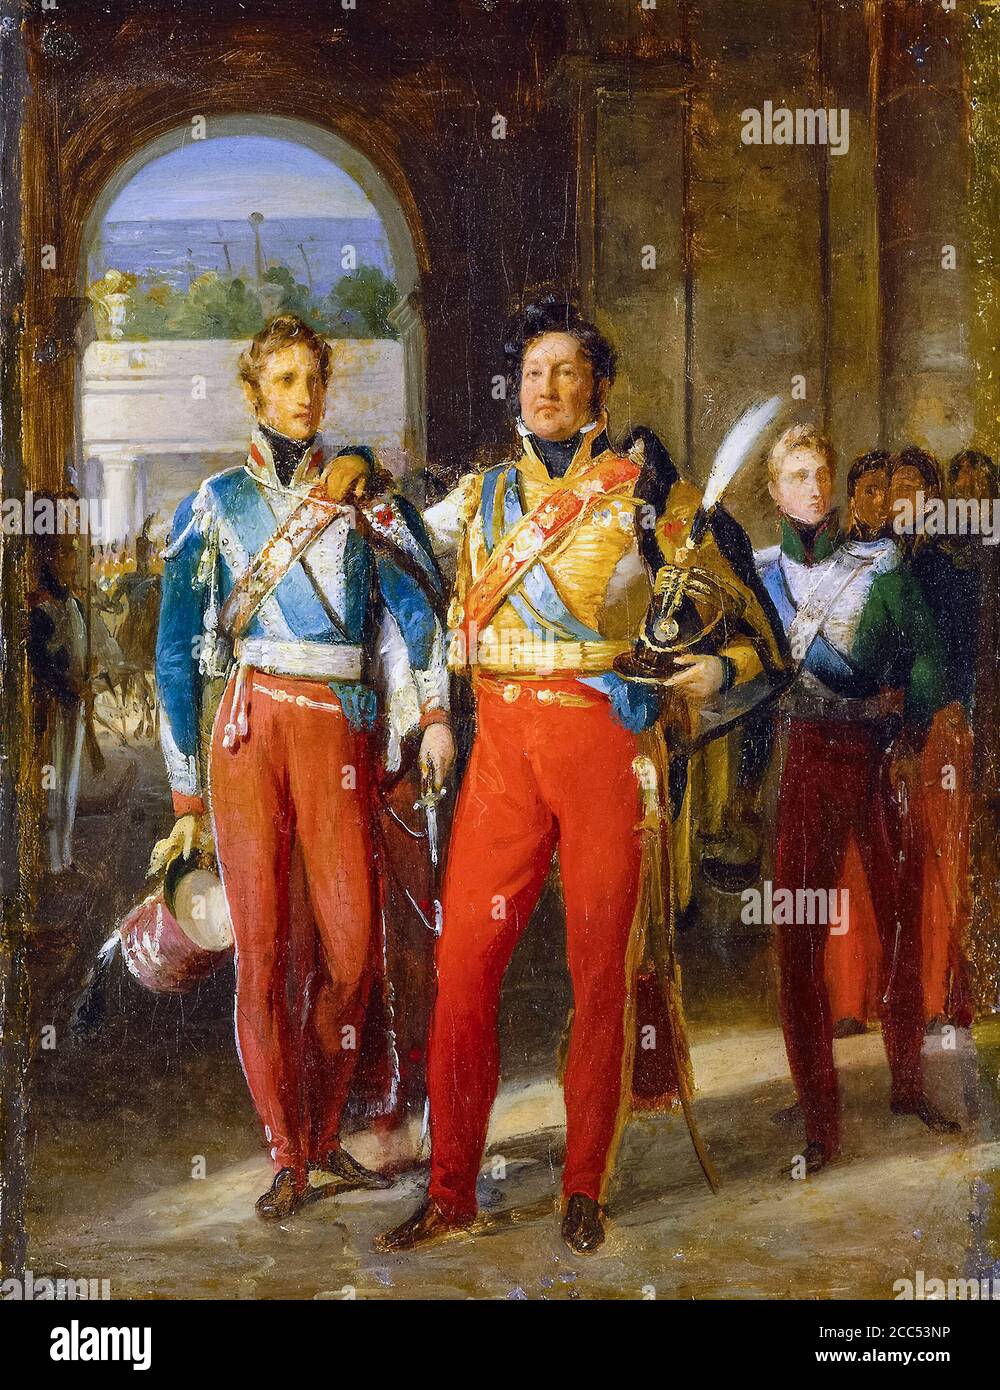 Louis-Philippe I (1773-1850), the last King of France, and his sons, the Duke of Chartres and the Duke of Némours, portrait painting by Baron François-Pascal-Simon Gérard, circa 1830-1832 Stock Photo